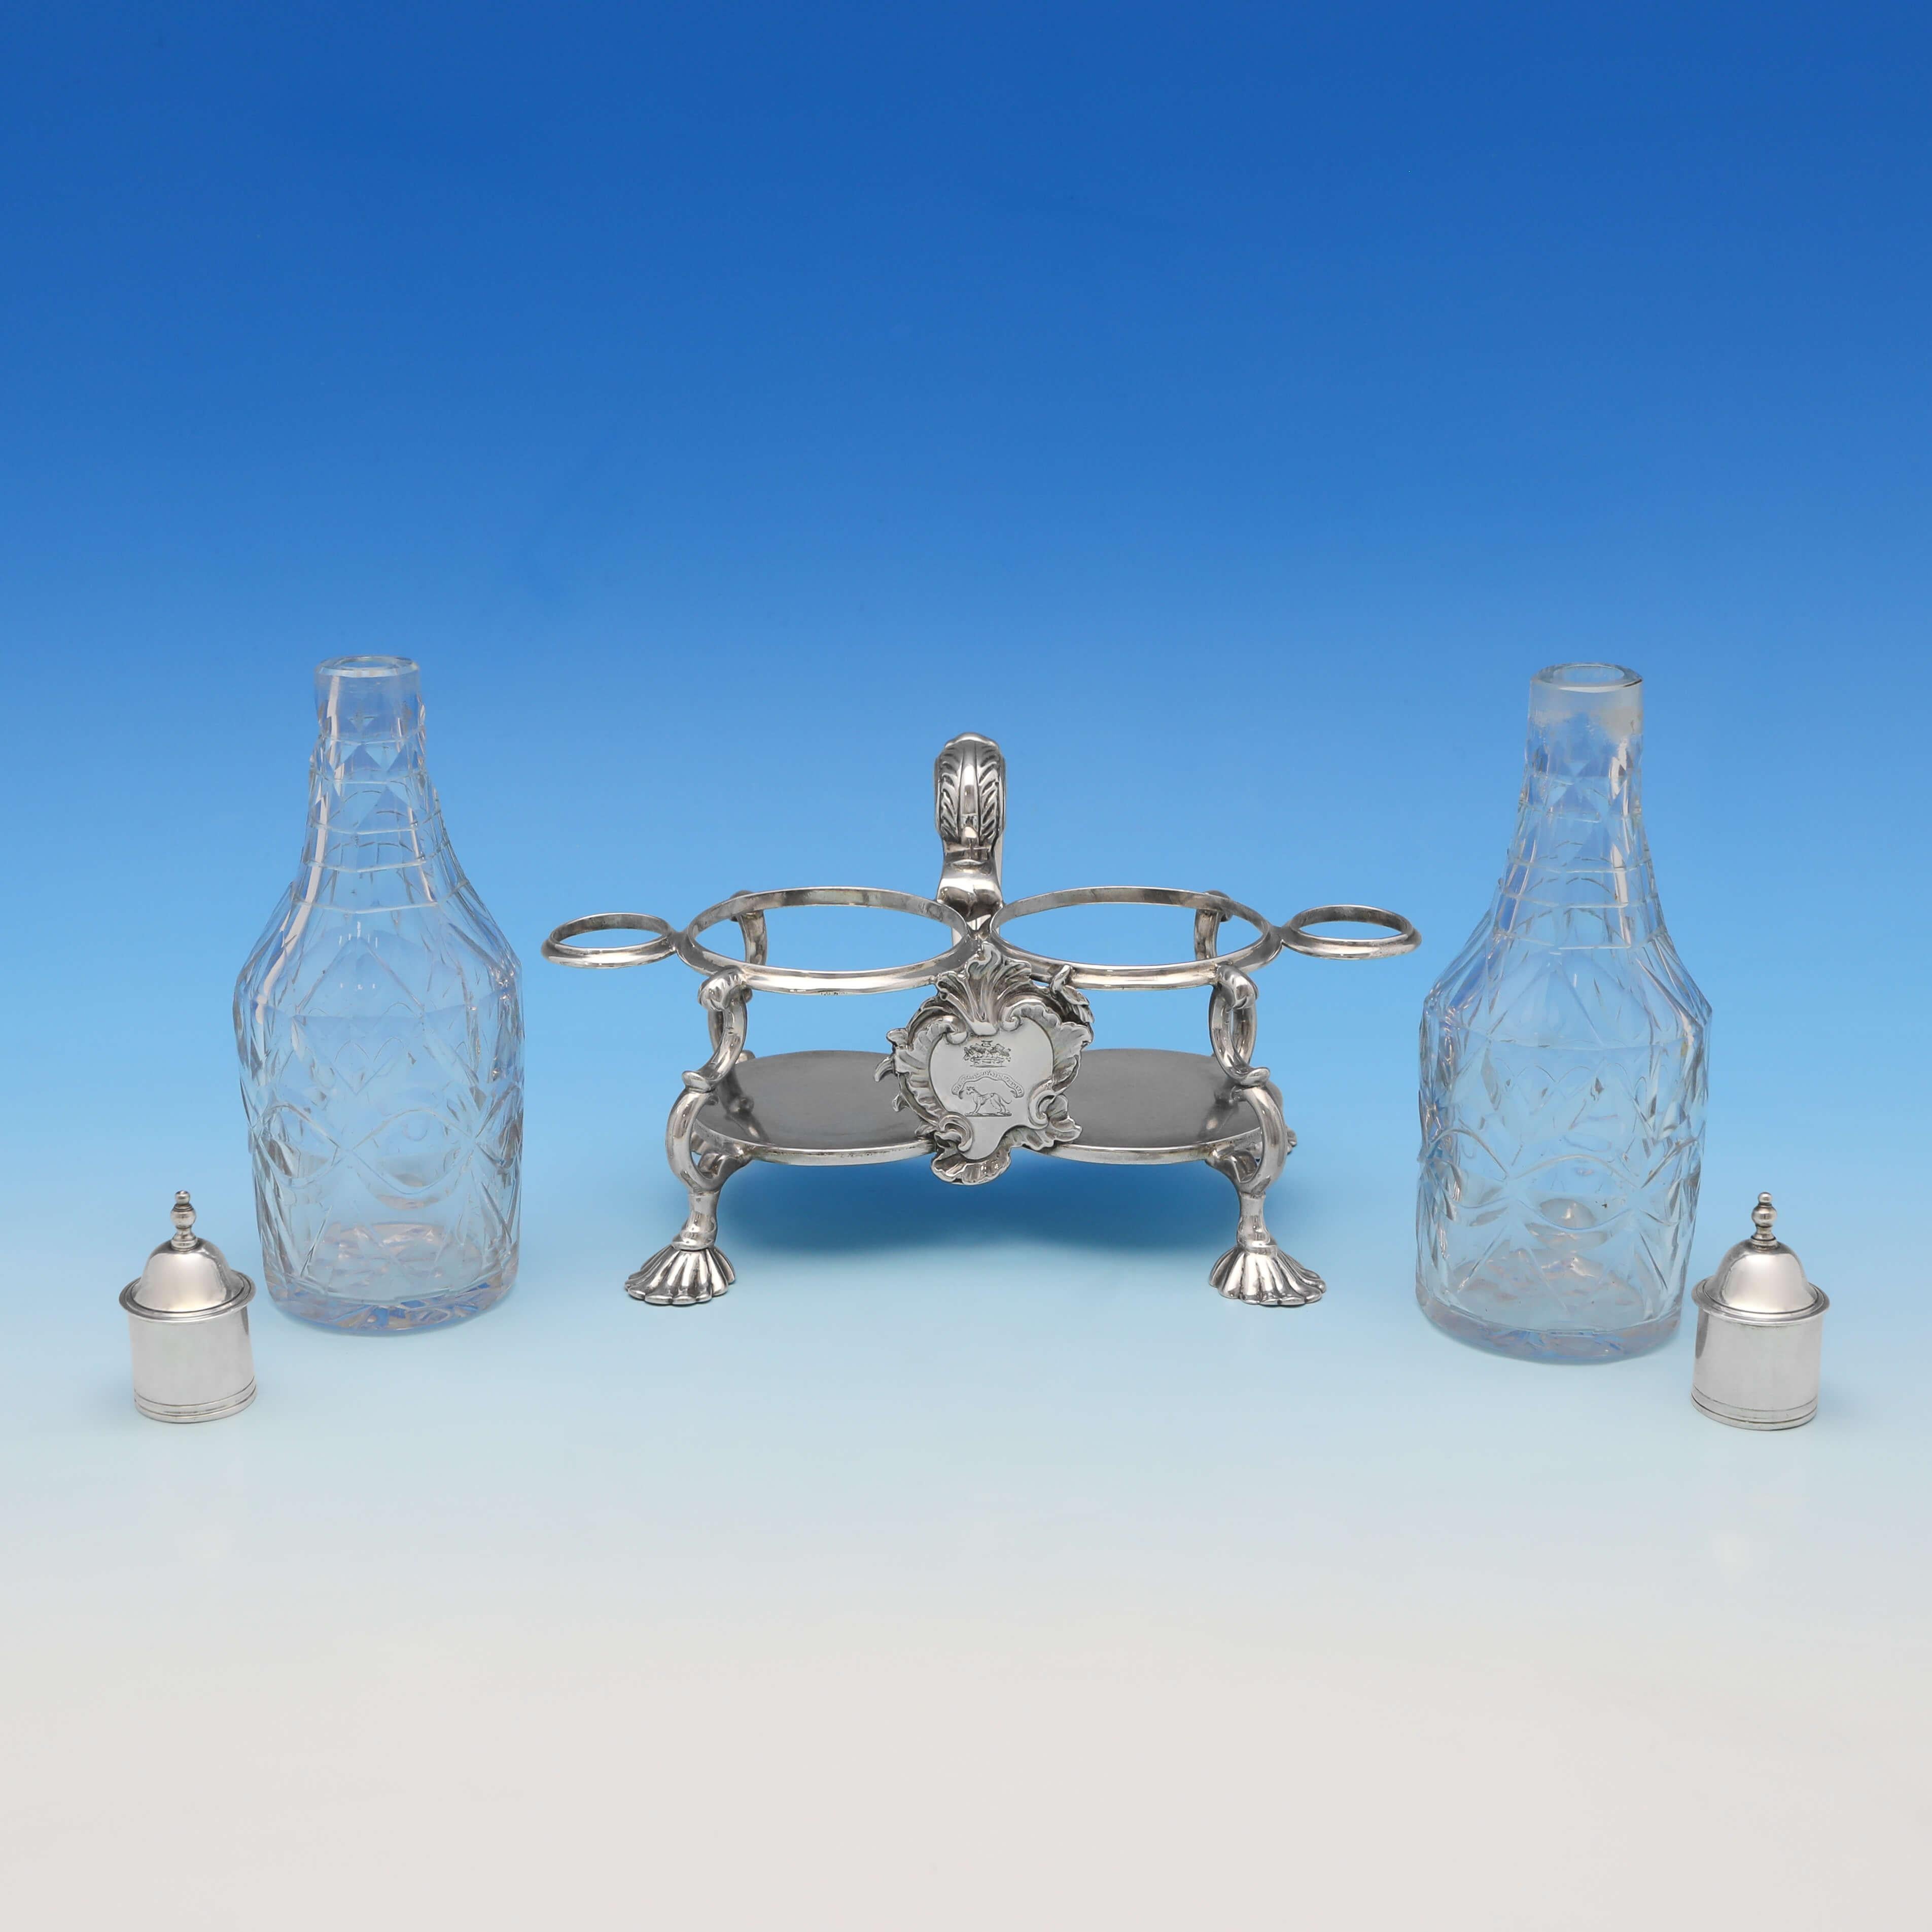 Hallmarked in London in 1751 by Samuel Wood, this striking, George II, antique sterling silver oil and vinegar set, is in the Rococo taste, and is engraved to one side with a crest. The oil and vinegar set measures 7.5